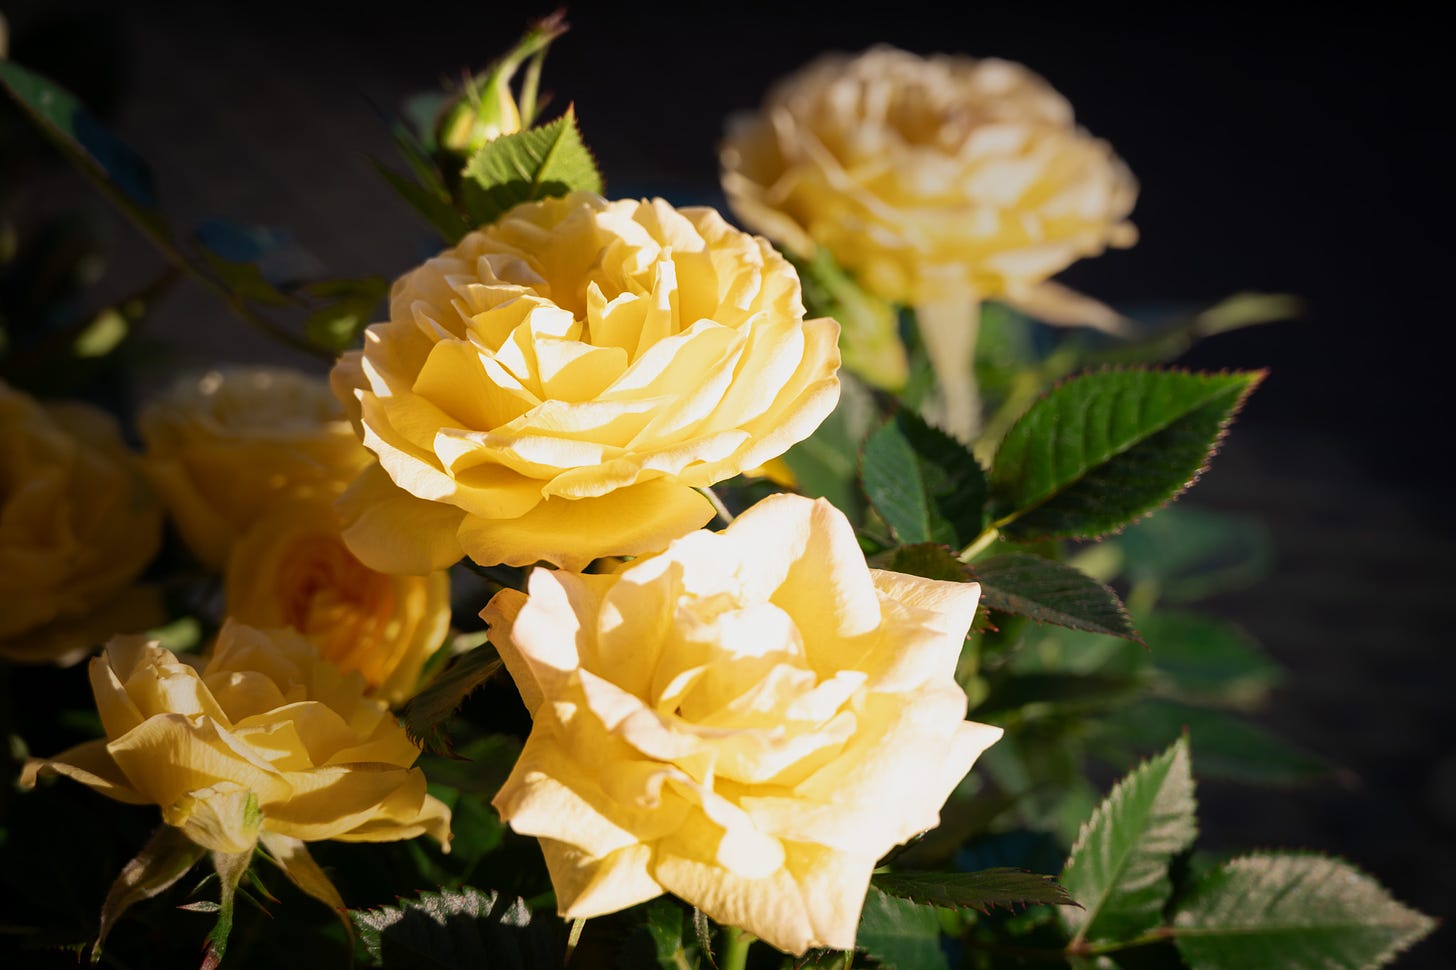 Yellow mini-rose blossoms with the sun shining on two against a blurred and darkened background